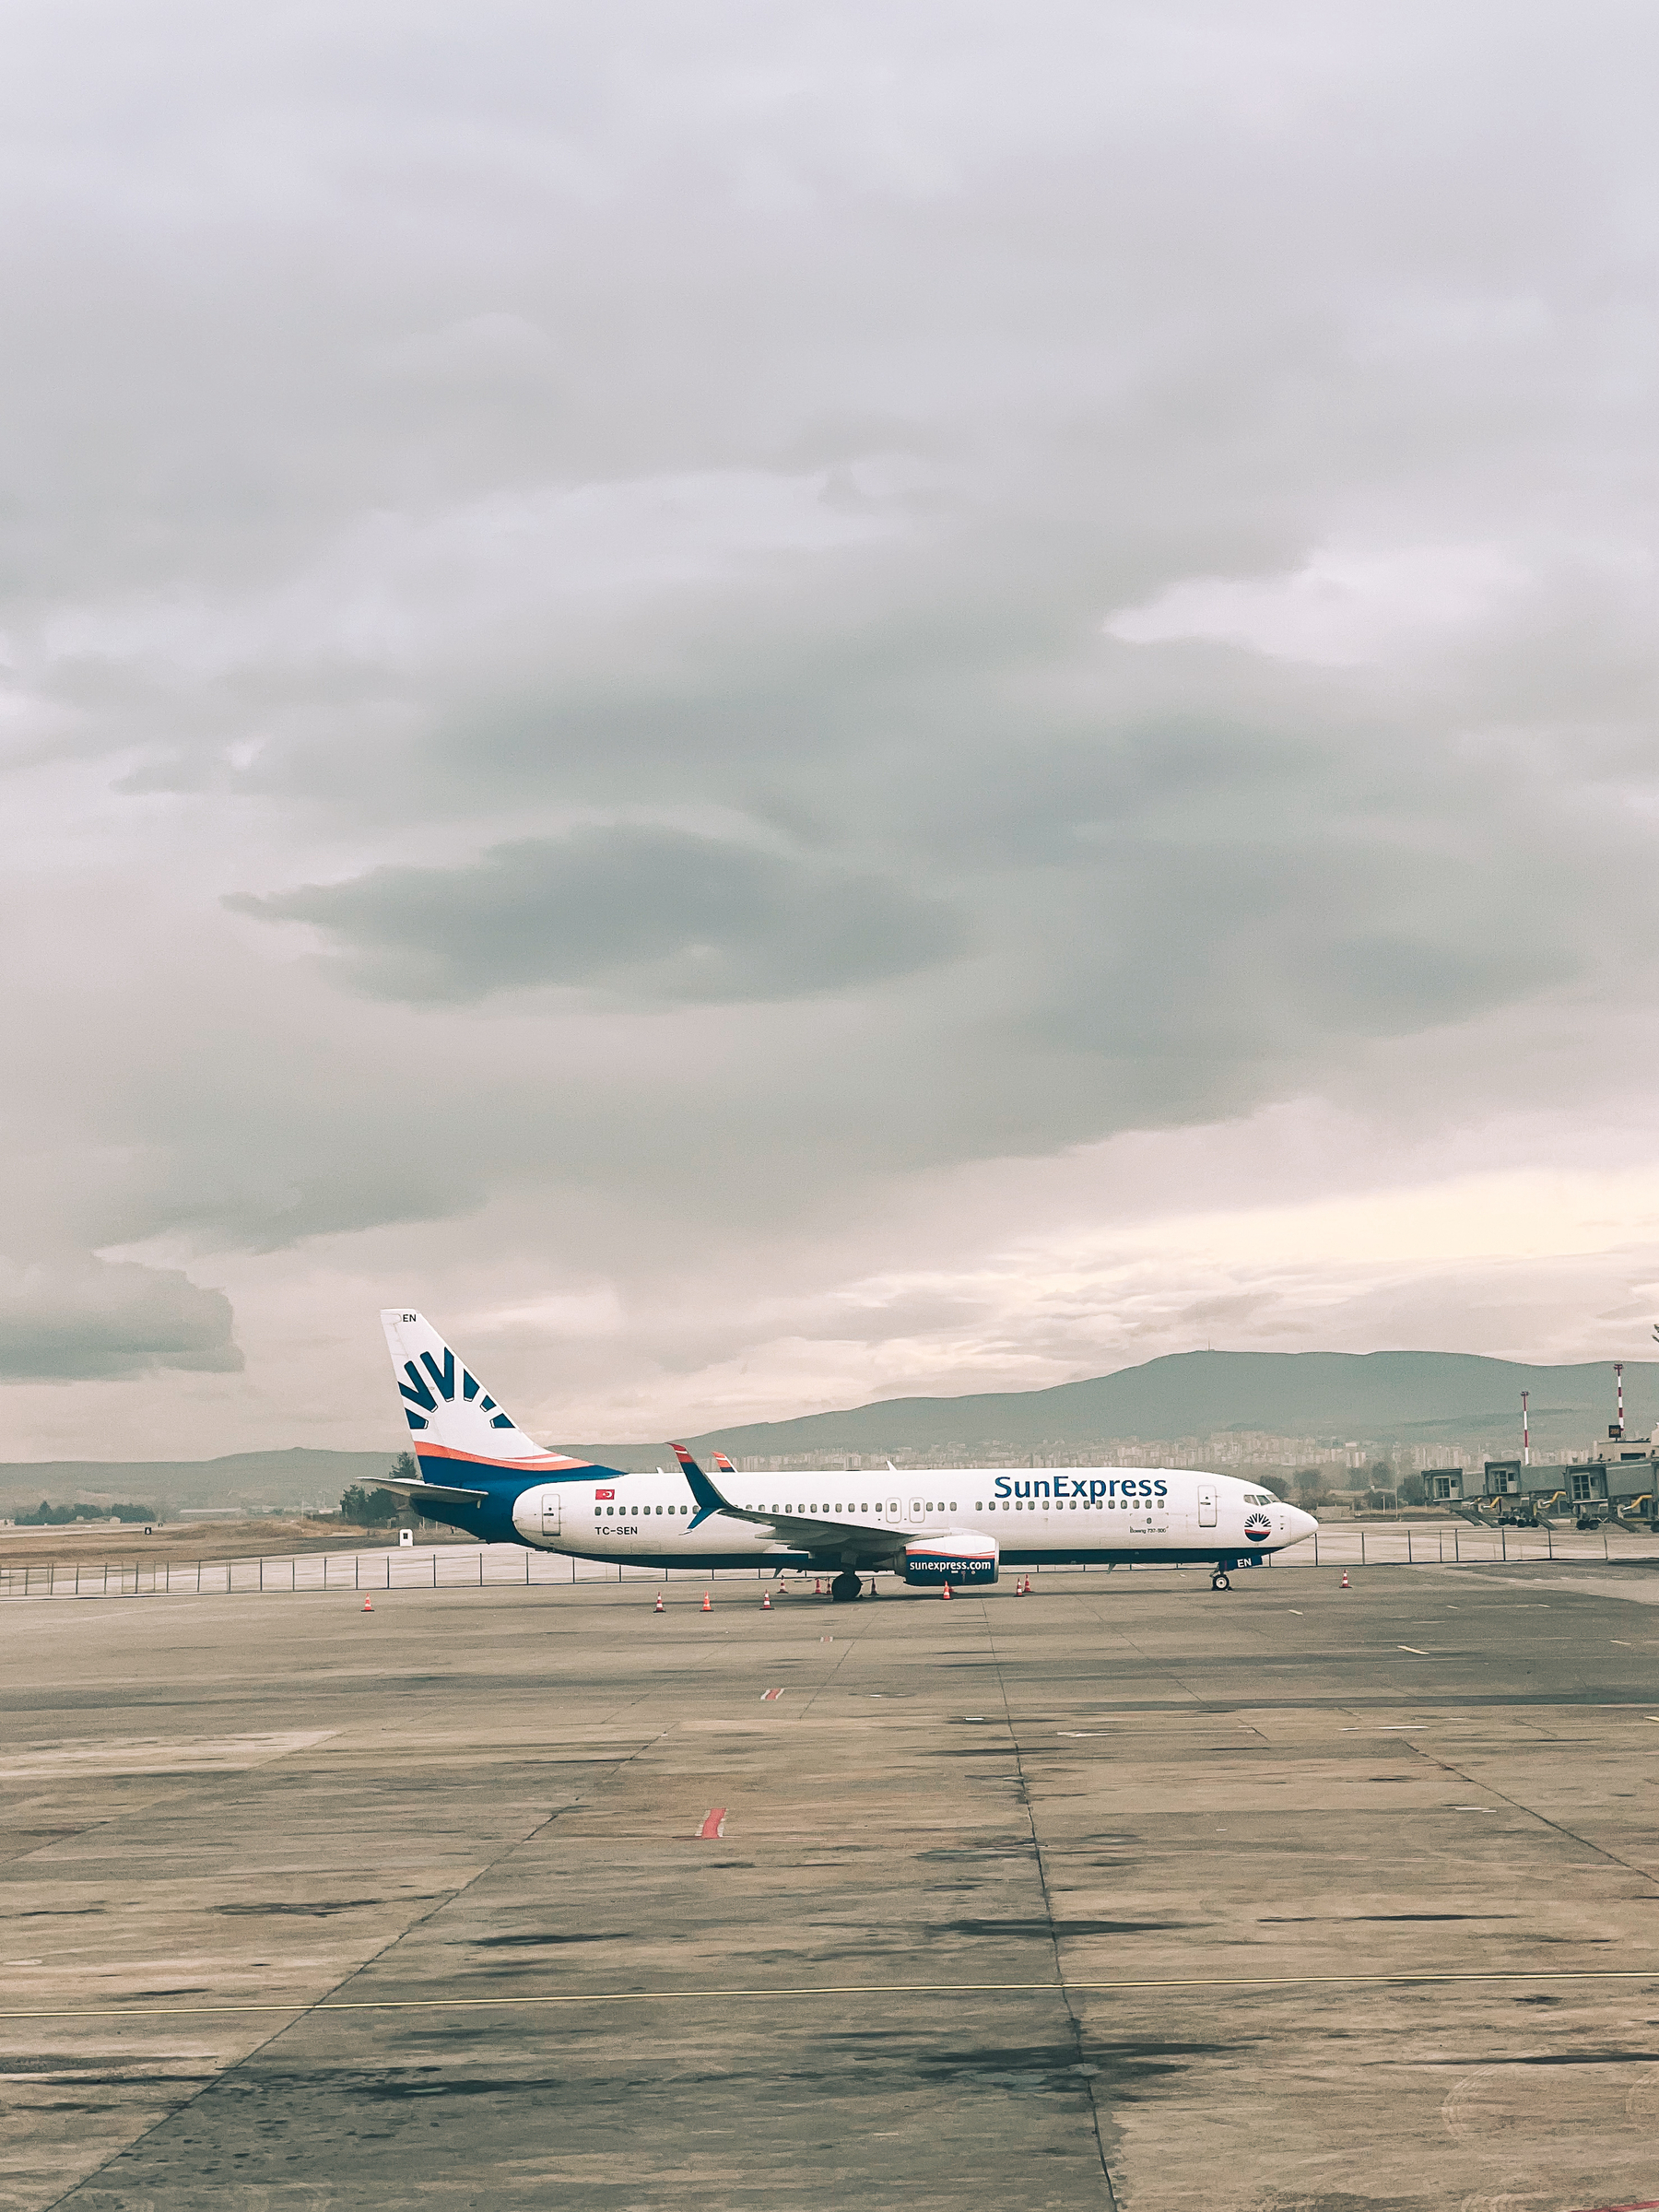 A “SunExpress” airplane sitting lonely on the tarmac. 